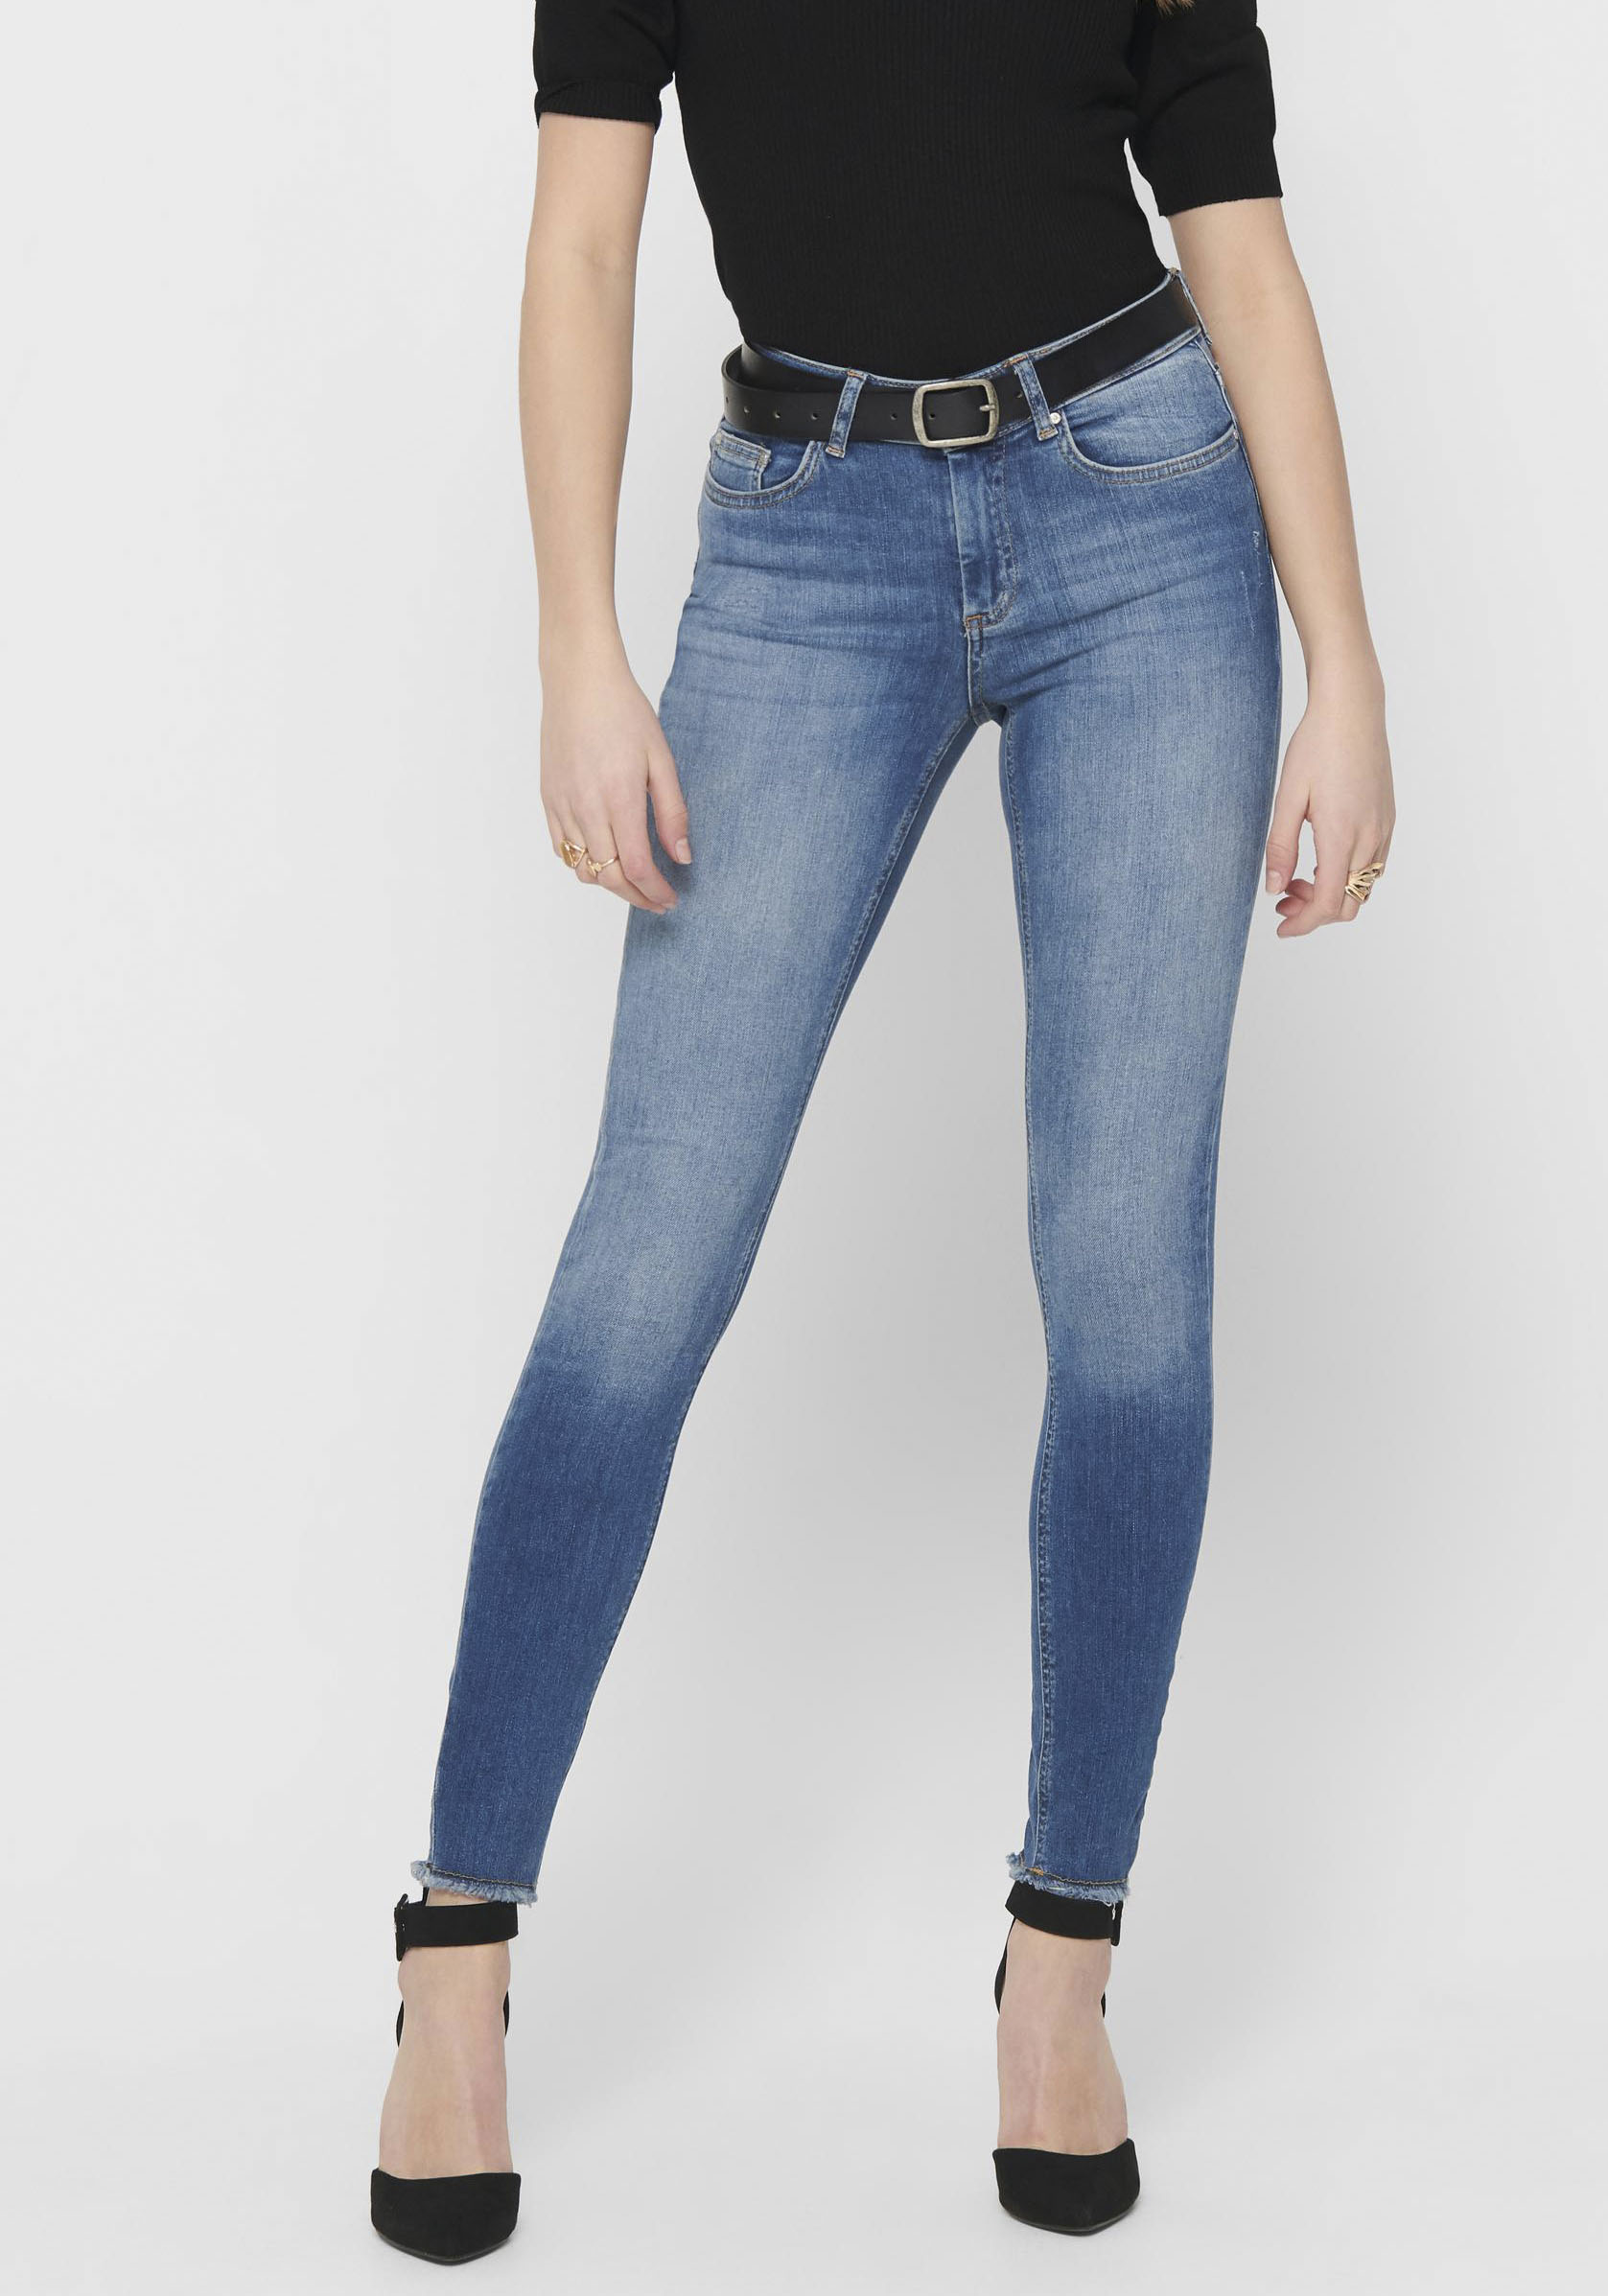 ONLY Ankle-Jeans »BLUSH« von Only